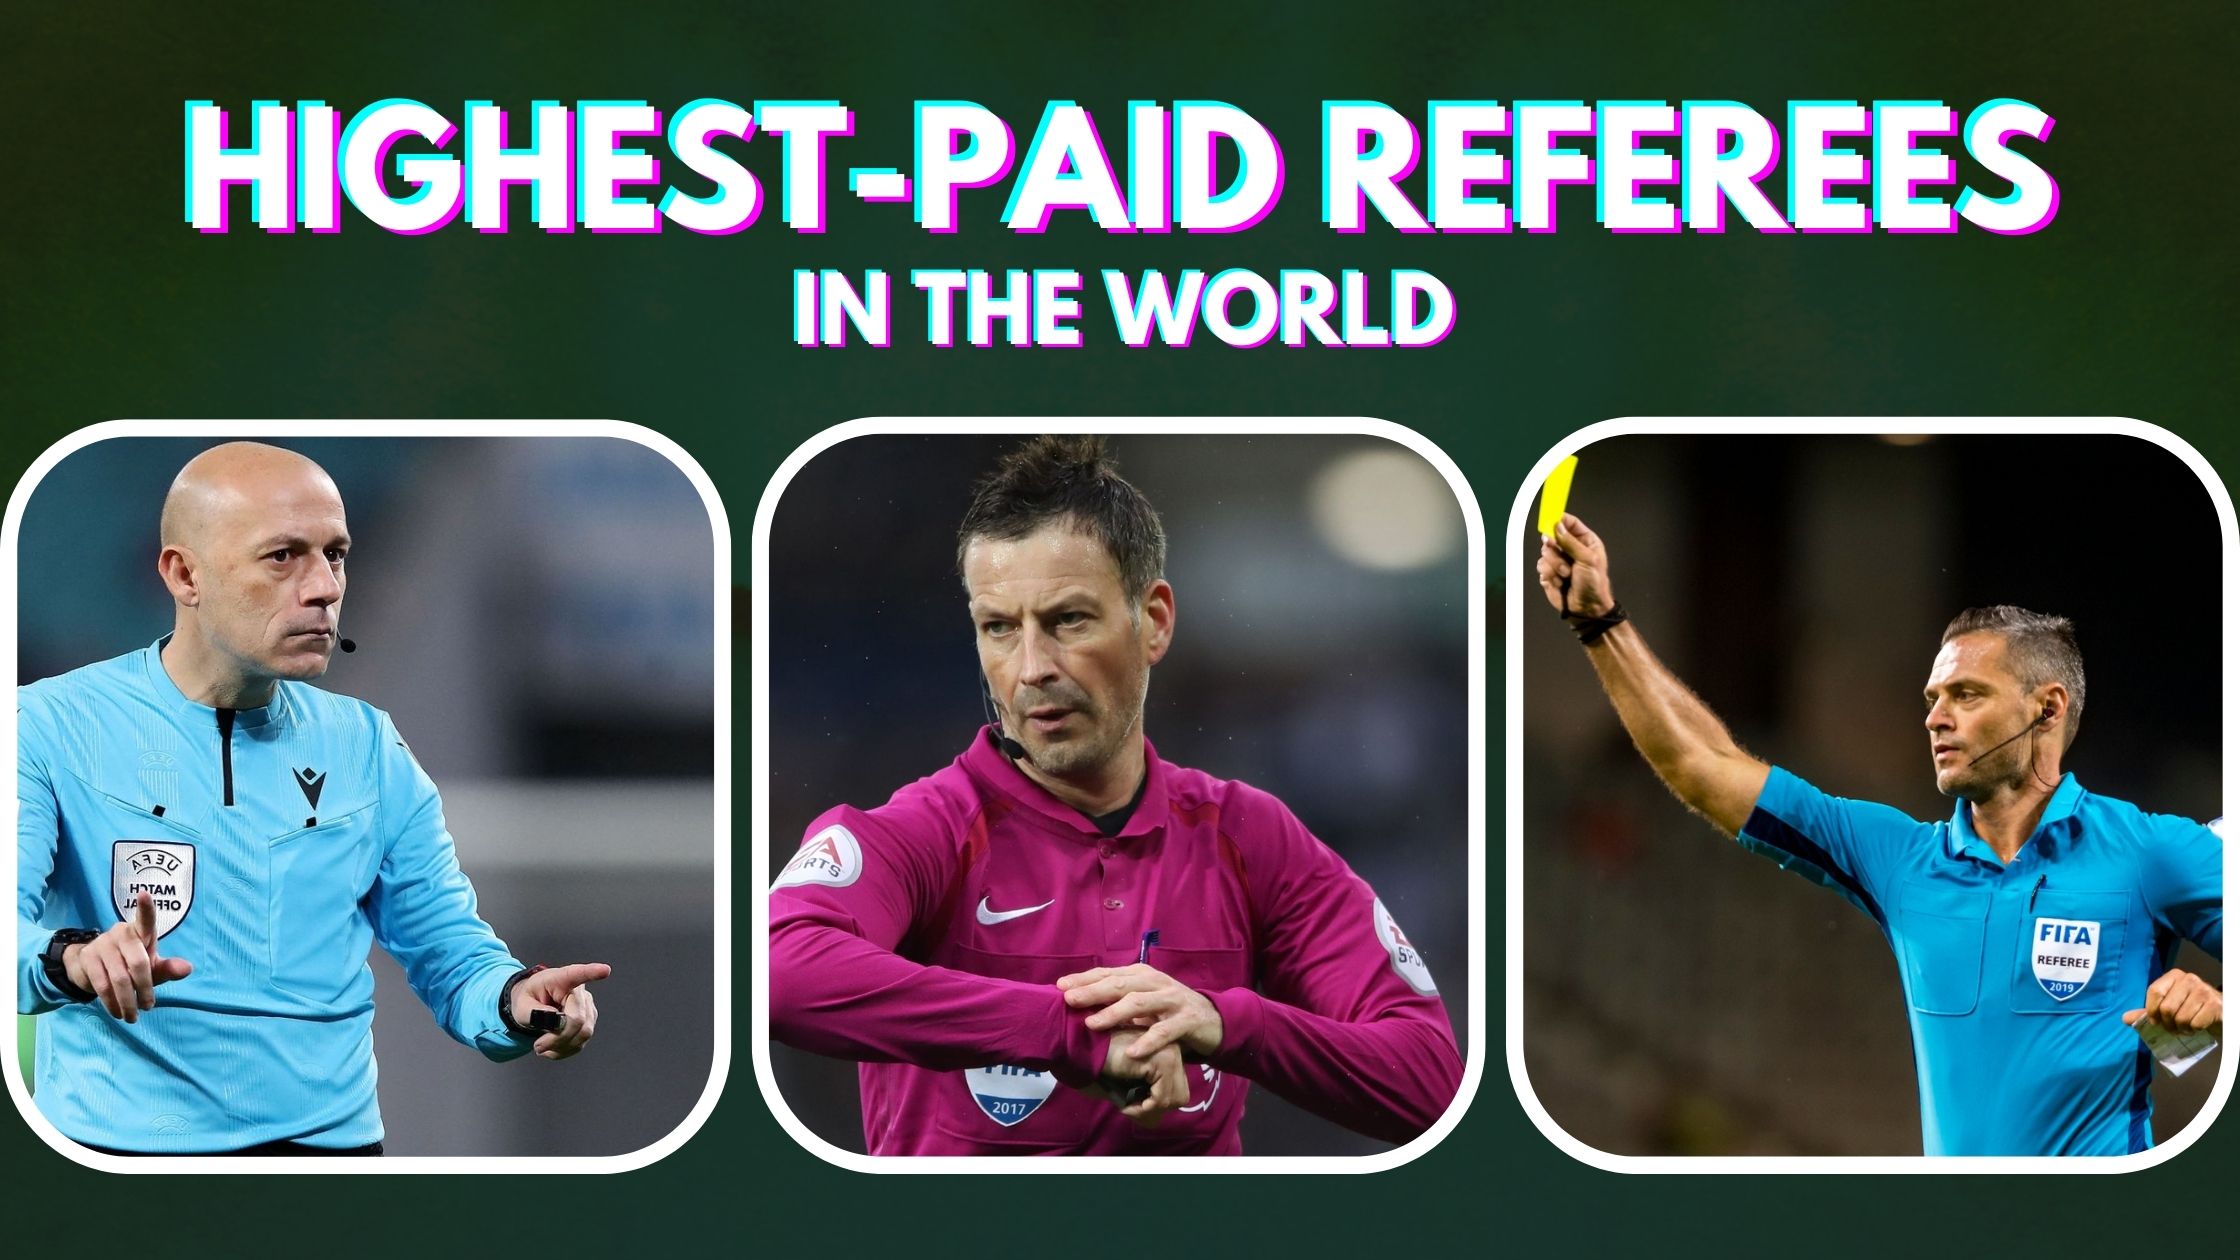 Top 10 Highest-Paid Referees In The World